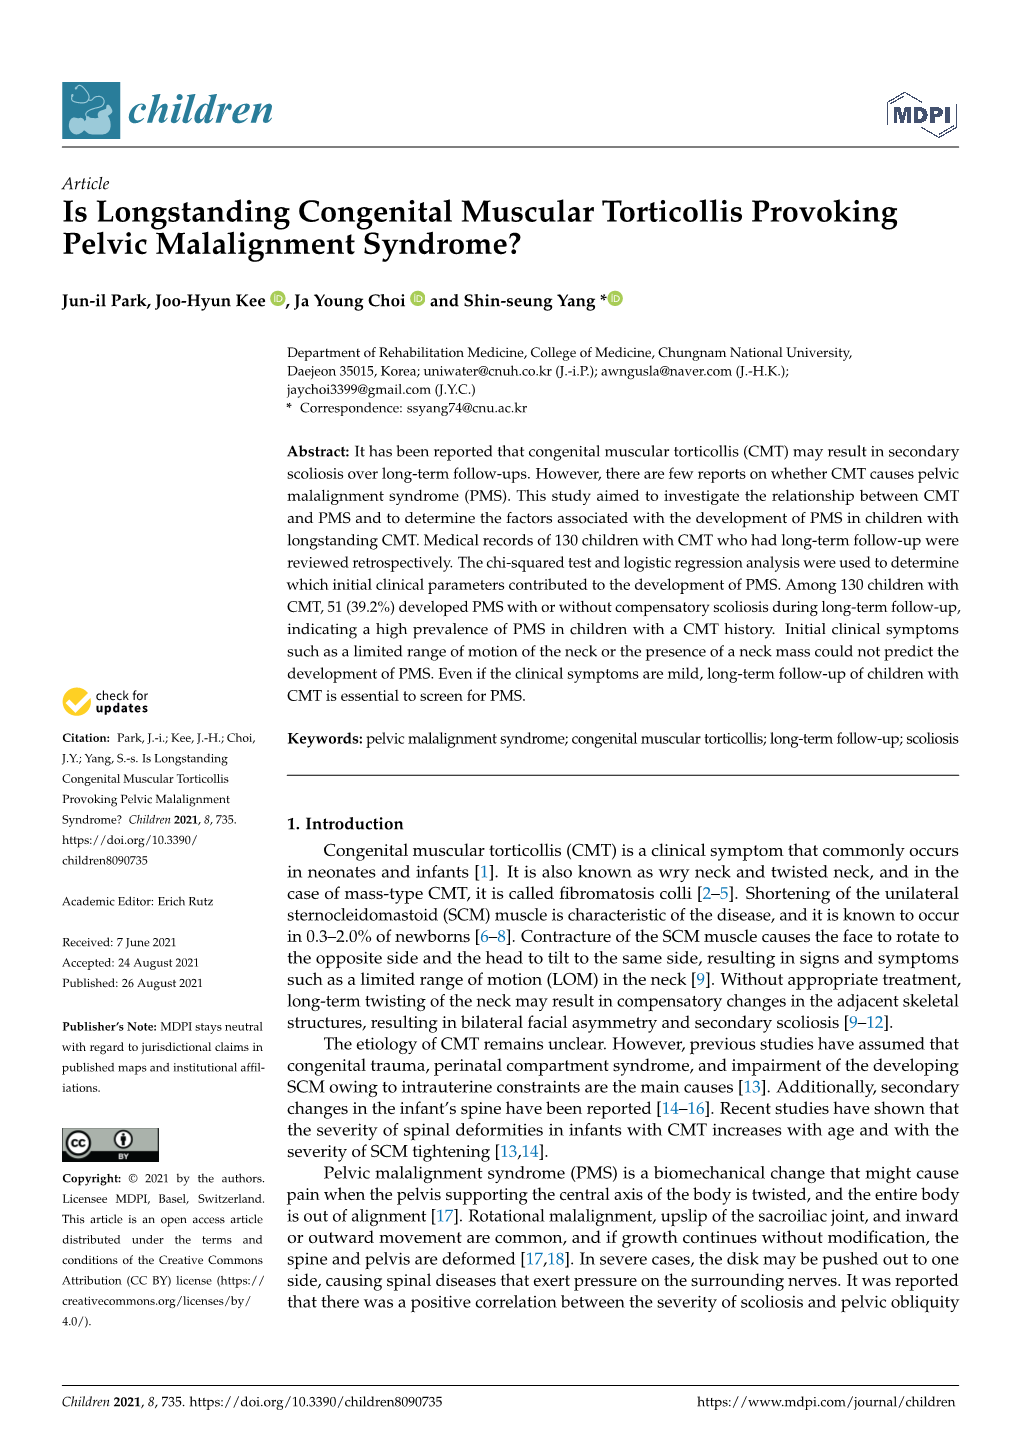 Is Longstanding Congenital Muscular Torticollis Provoking Pelvic Malalignment Syndrome?